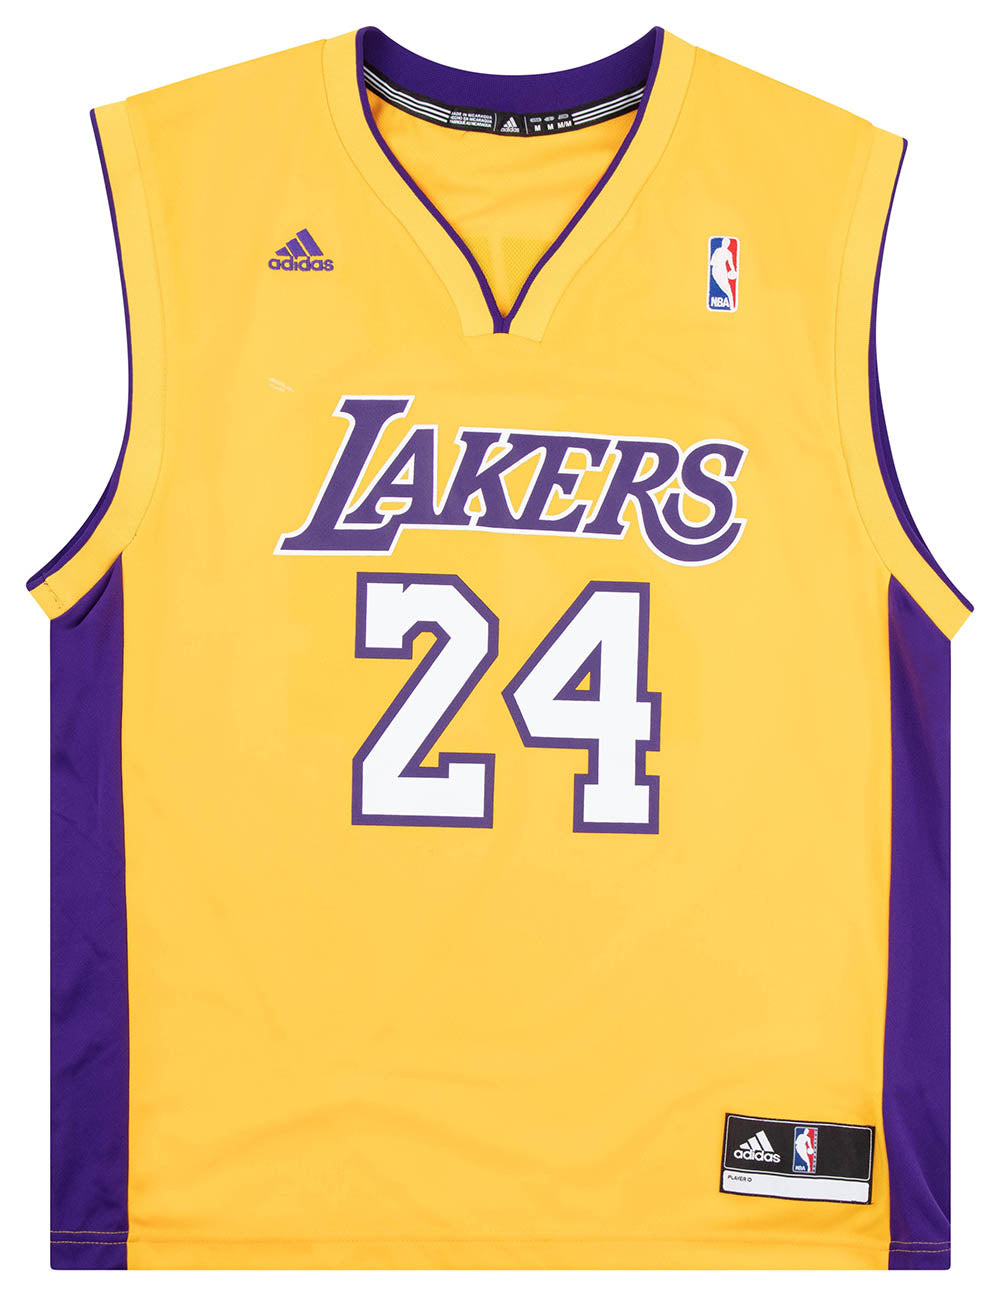 2010-14 LA LAKERS BRYANT #24 ADIDAS JERSEY (HOME) M - W/TAGS